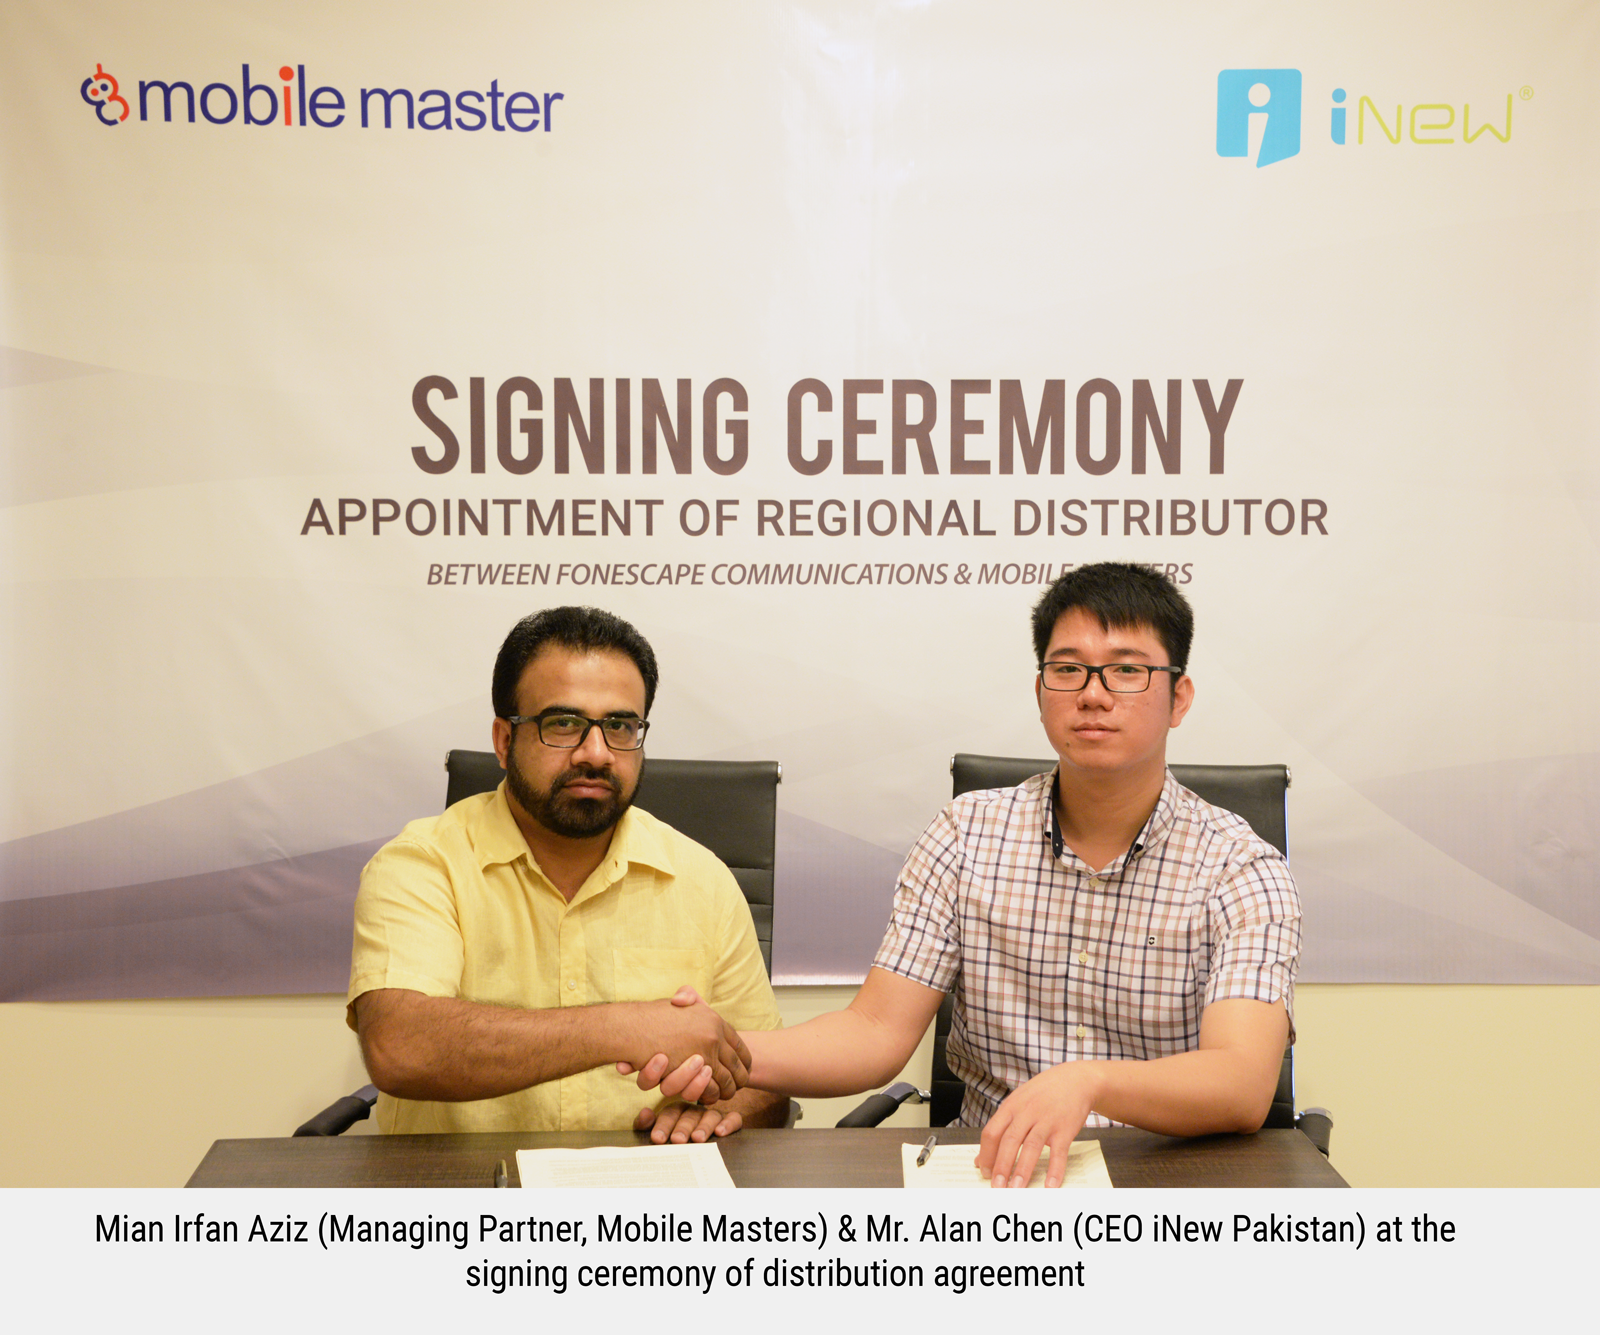 iNew Pakistan Signs Regional Distribution Agreement with Mobile Masters